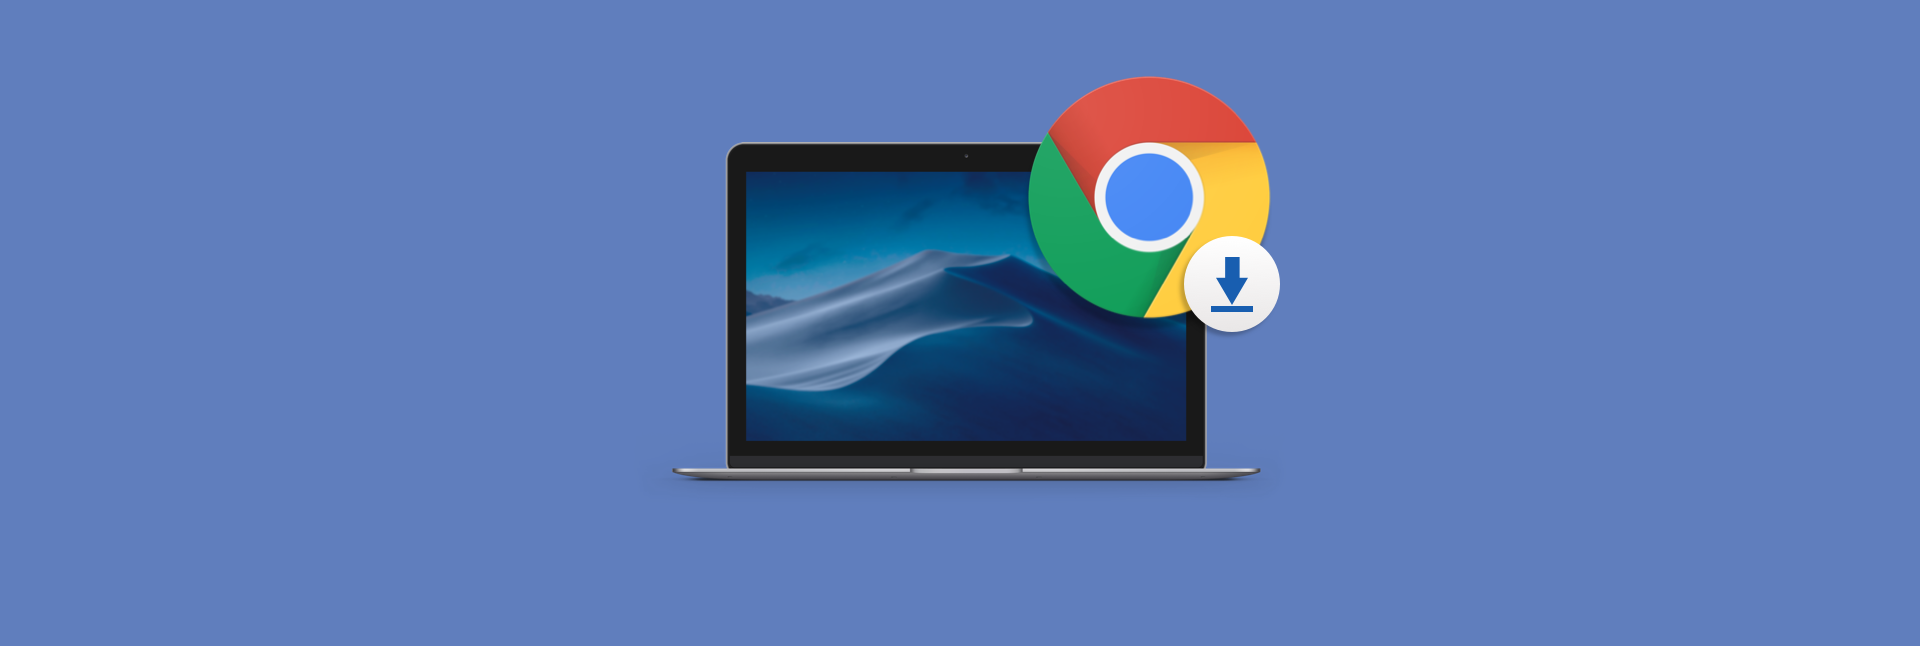 where is extensions in google chrome for mac